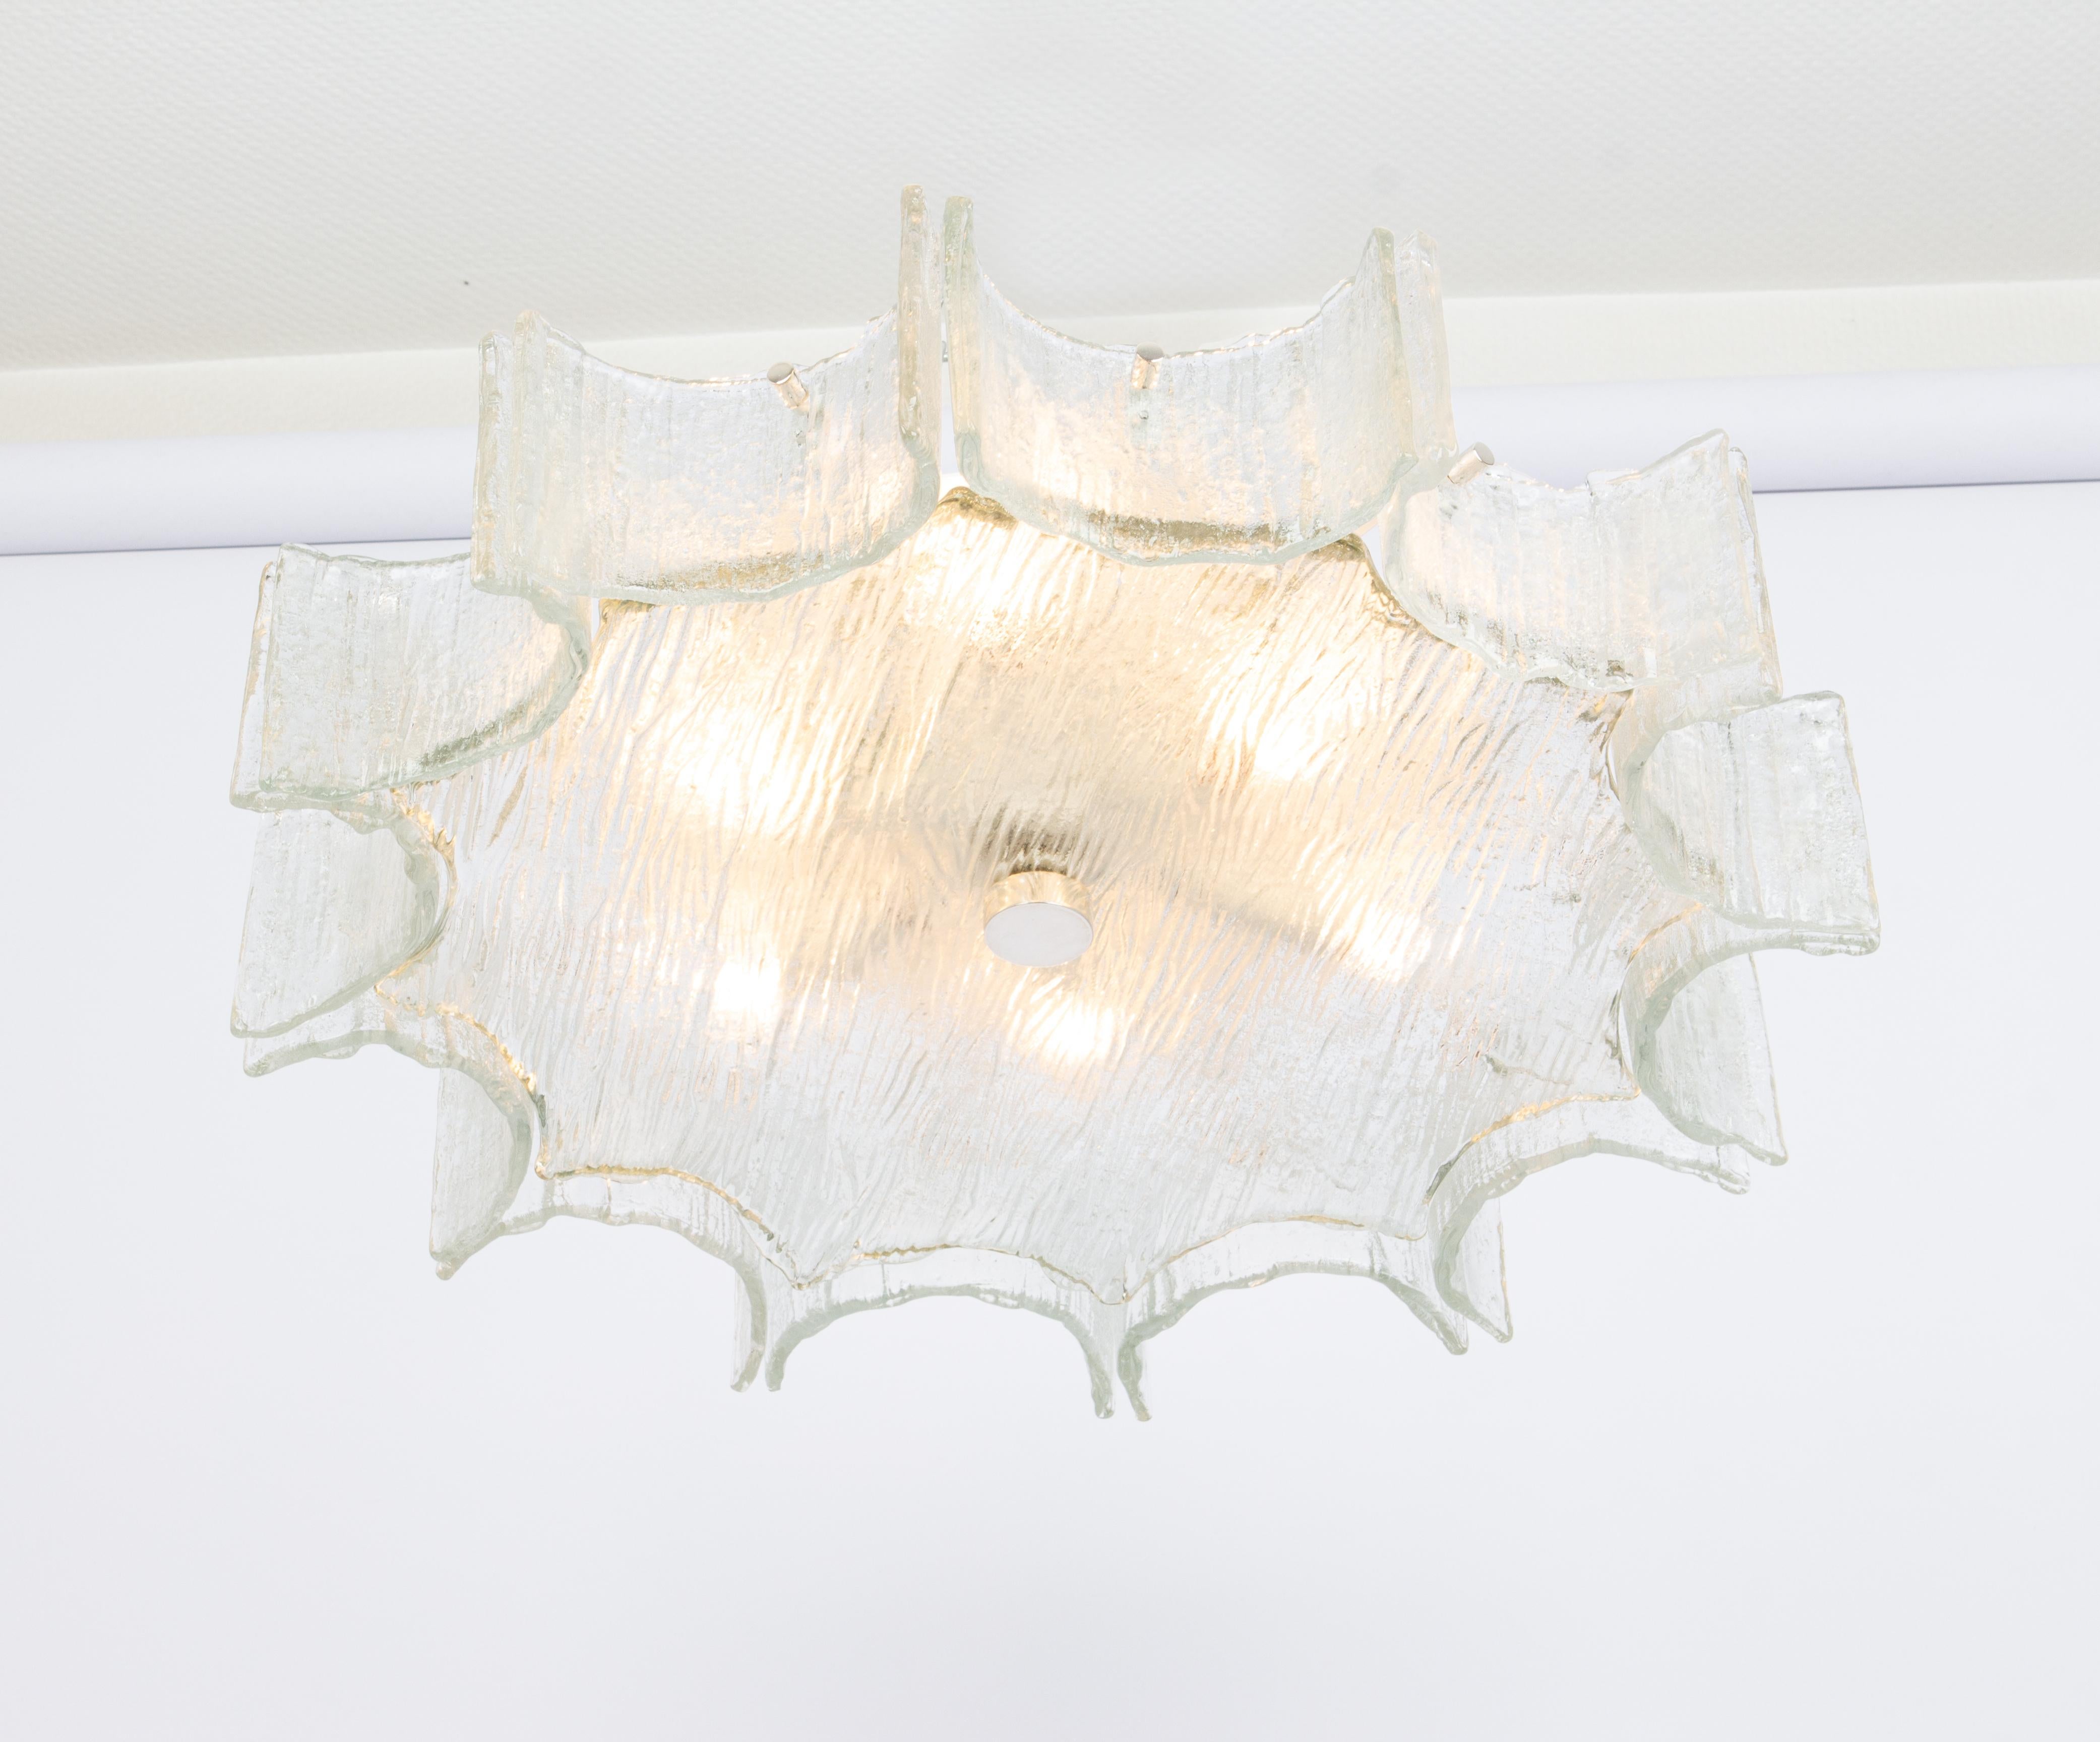 Fantastic star shape chandelier by Kaiser, Germany, manufactured, circa 1960-1969. Curved Murano glasses suspended from a fixture and signed by the German maker Kaiser Leuchten.

Sockets: six x E14 candelabra bulbs.( max. 40 watt each) 
Light bulbs